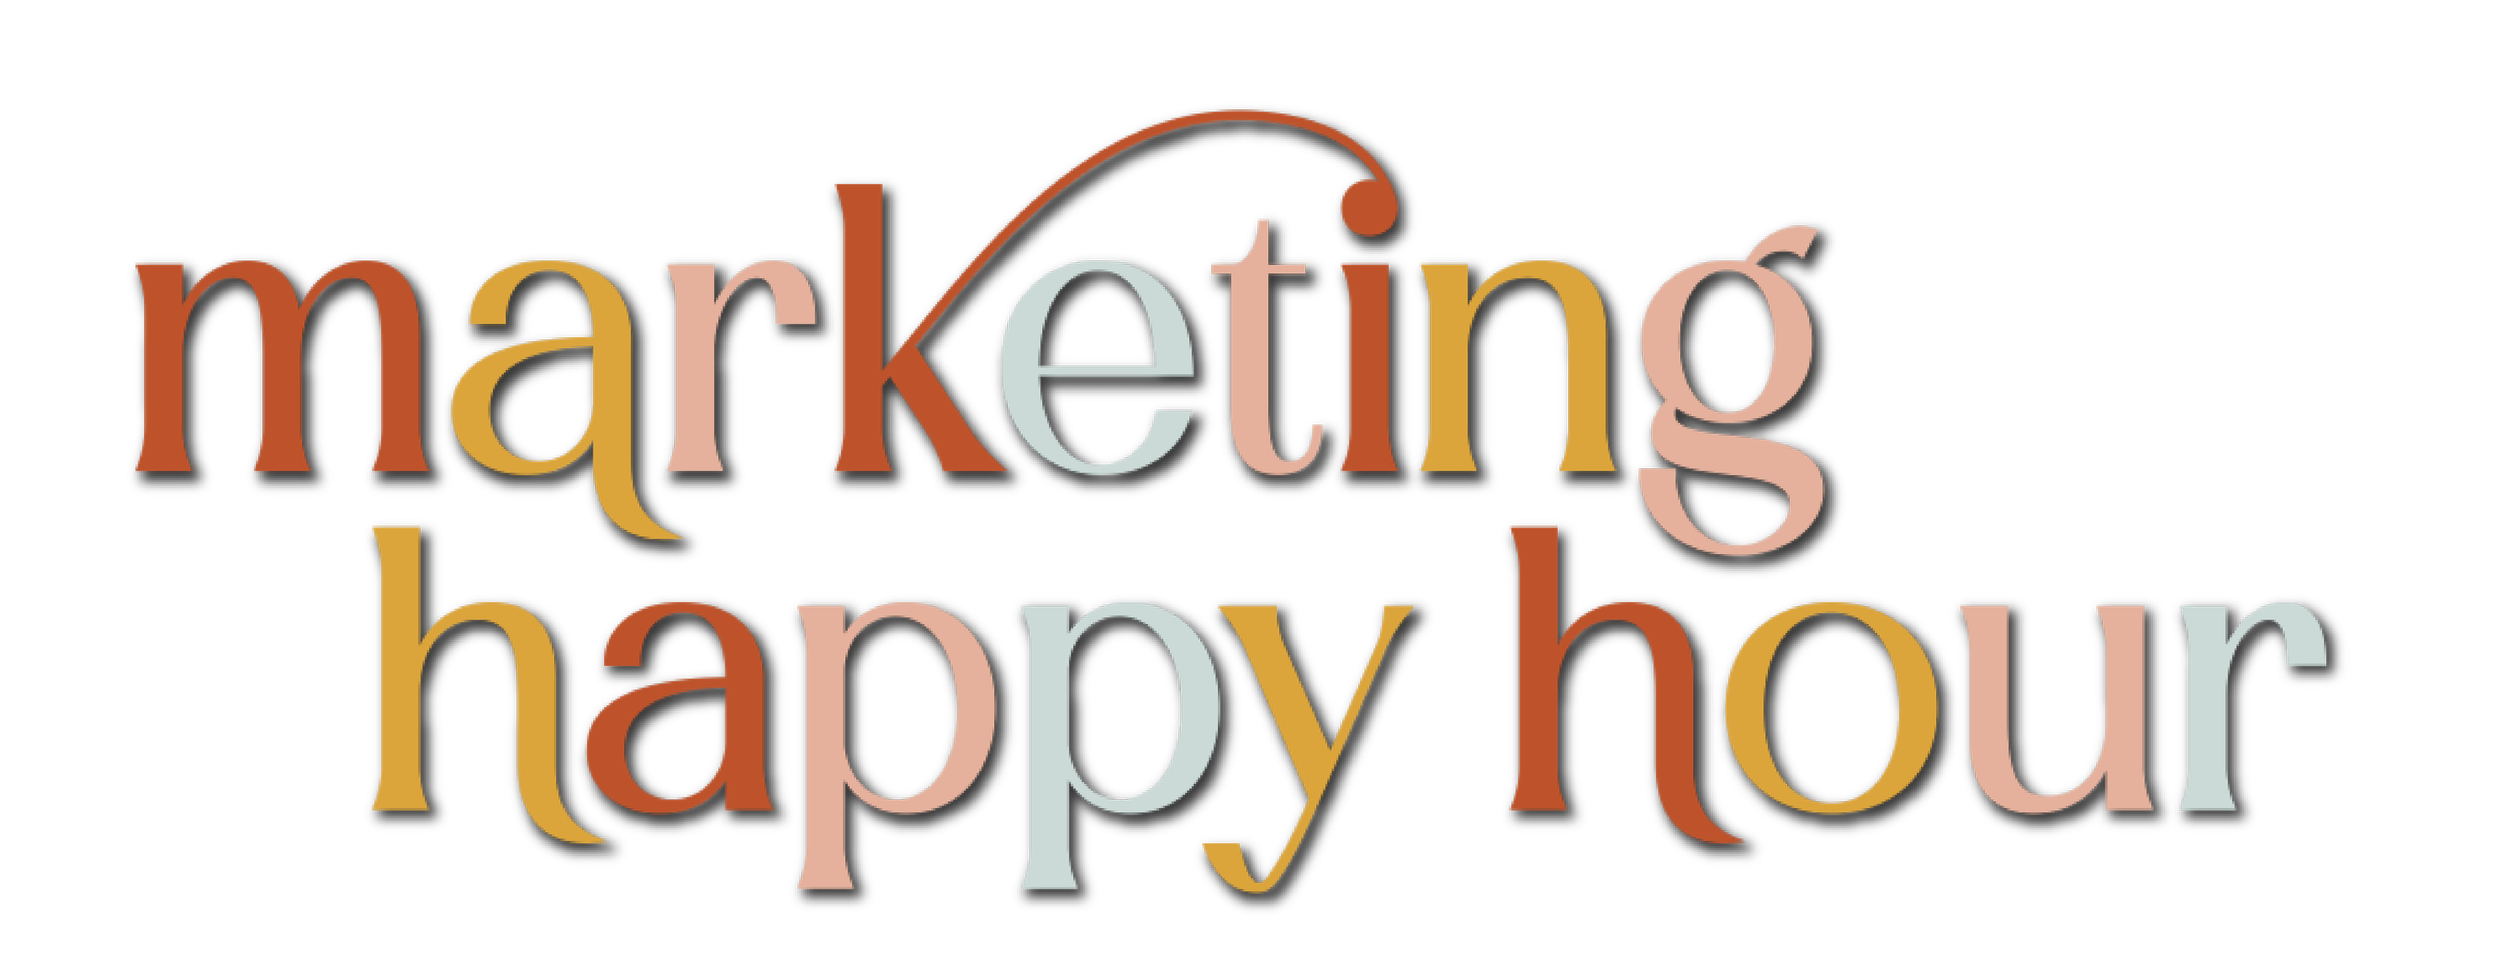 Haapy clients!! Happy us!! - Mauritius Business Marketing